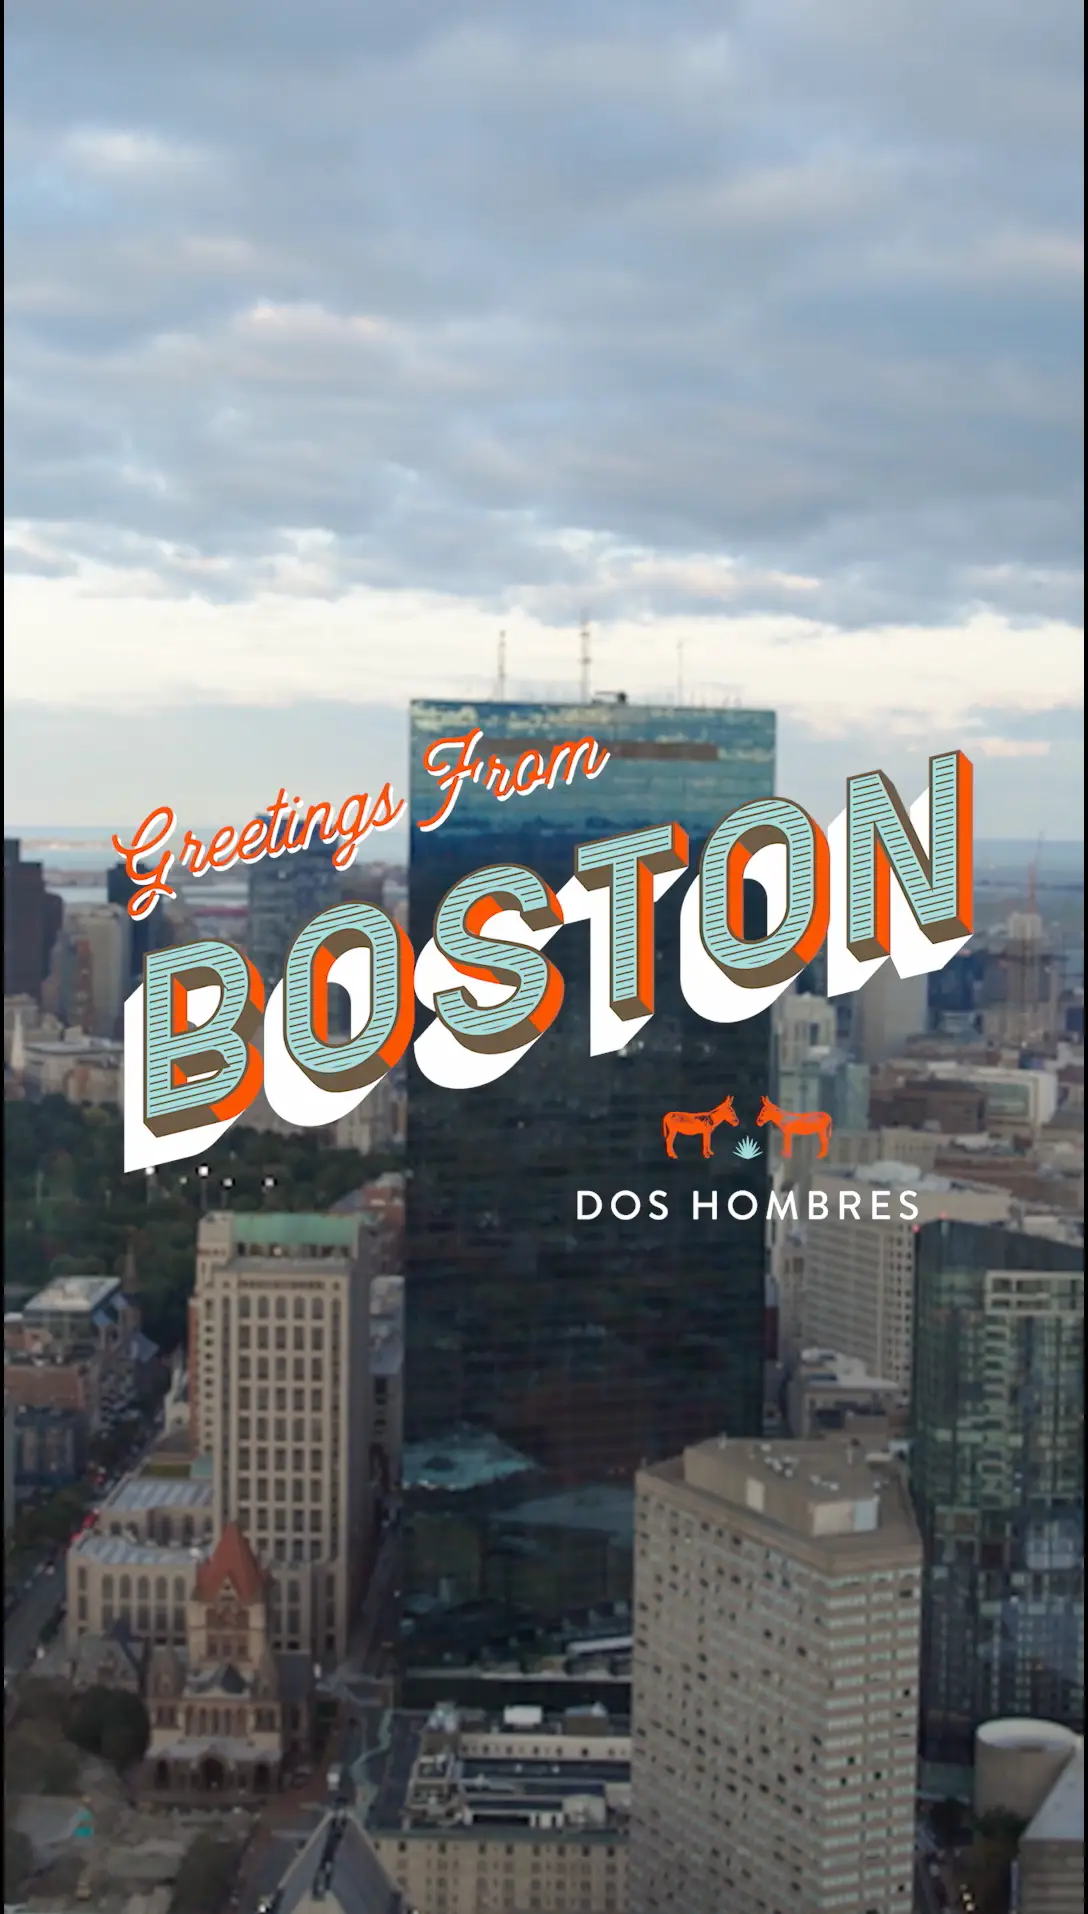 Greetings from Dos Hombres in Boston - screenshot.